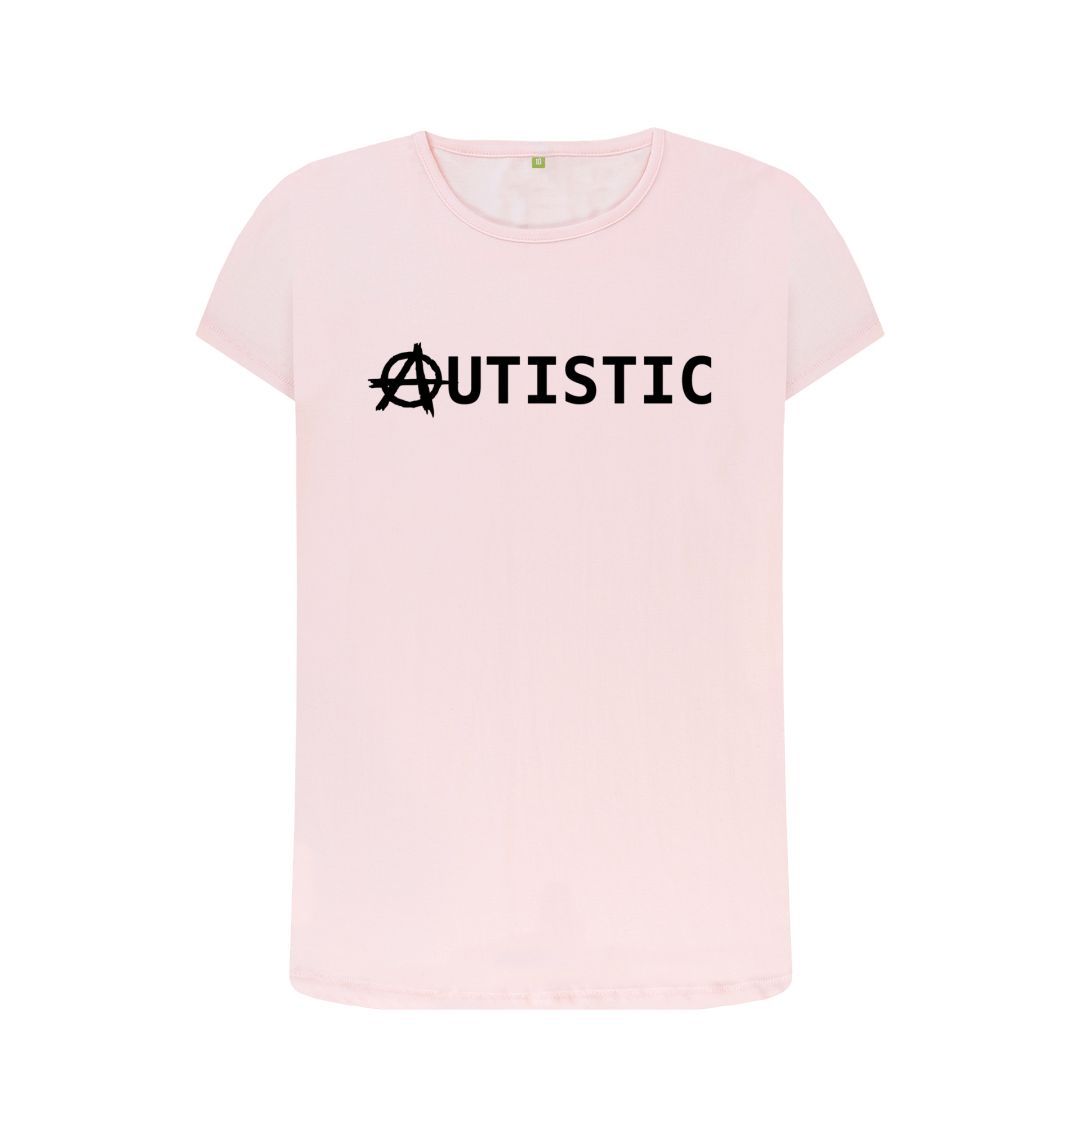 Pink Autistic Anarchy womens fit crew